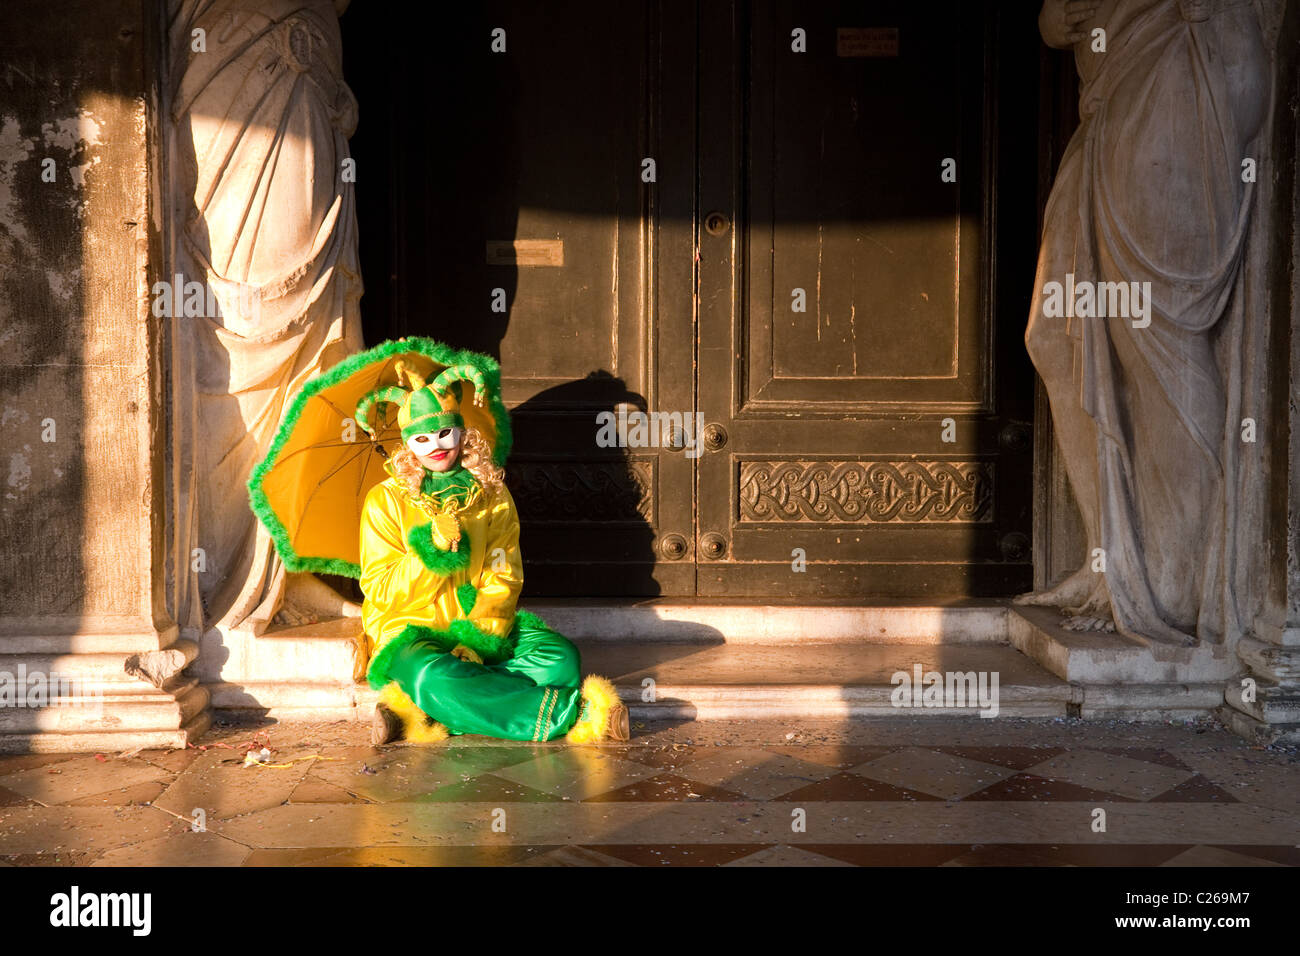 A young woman in clown costume sitting in a doorway, St Marks square, the carnival, Venice, Italy Stock Photo